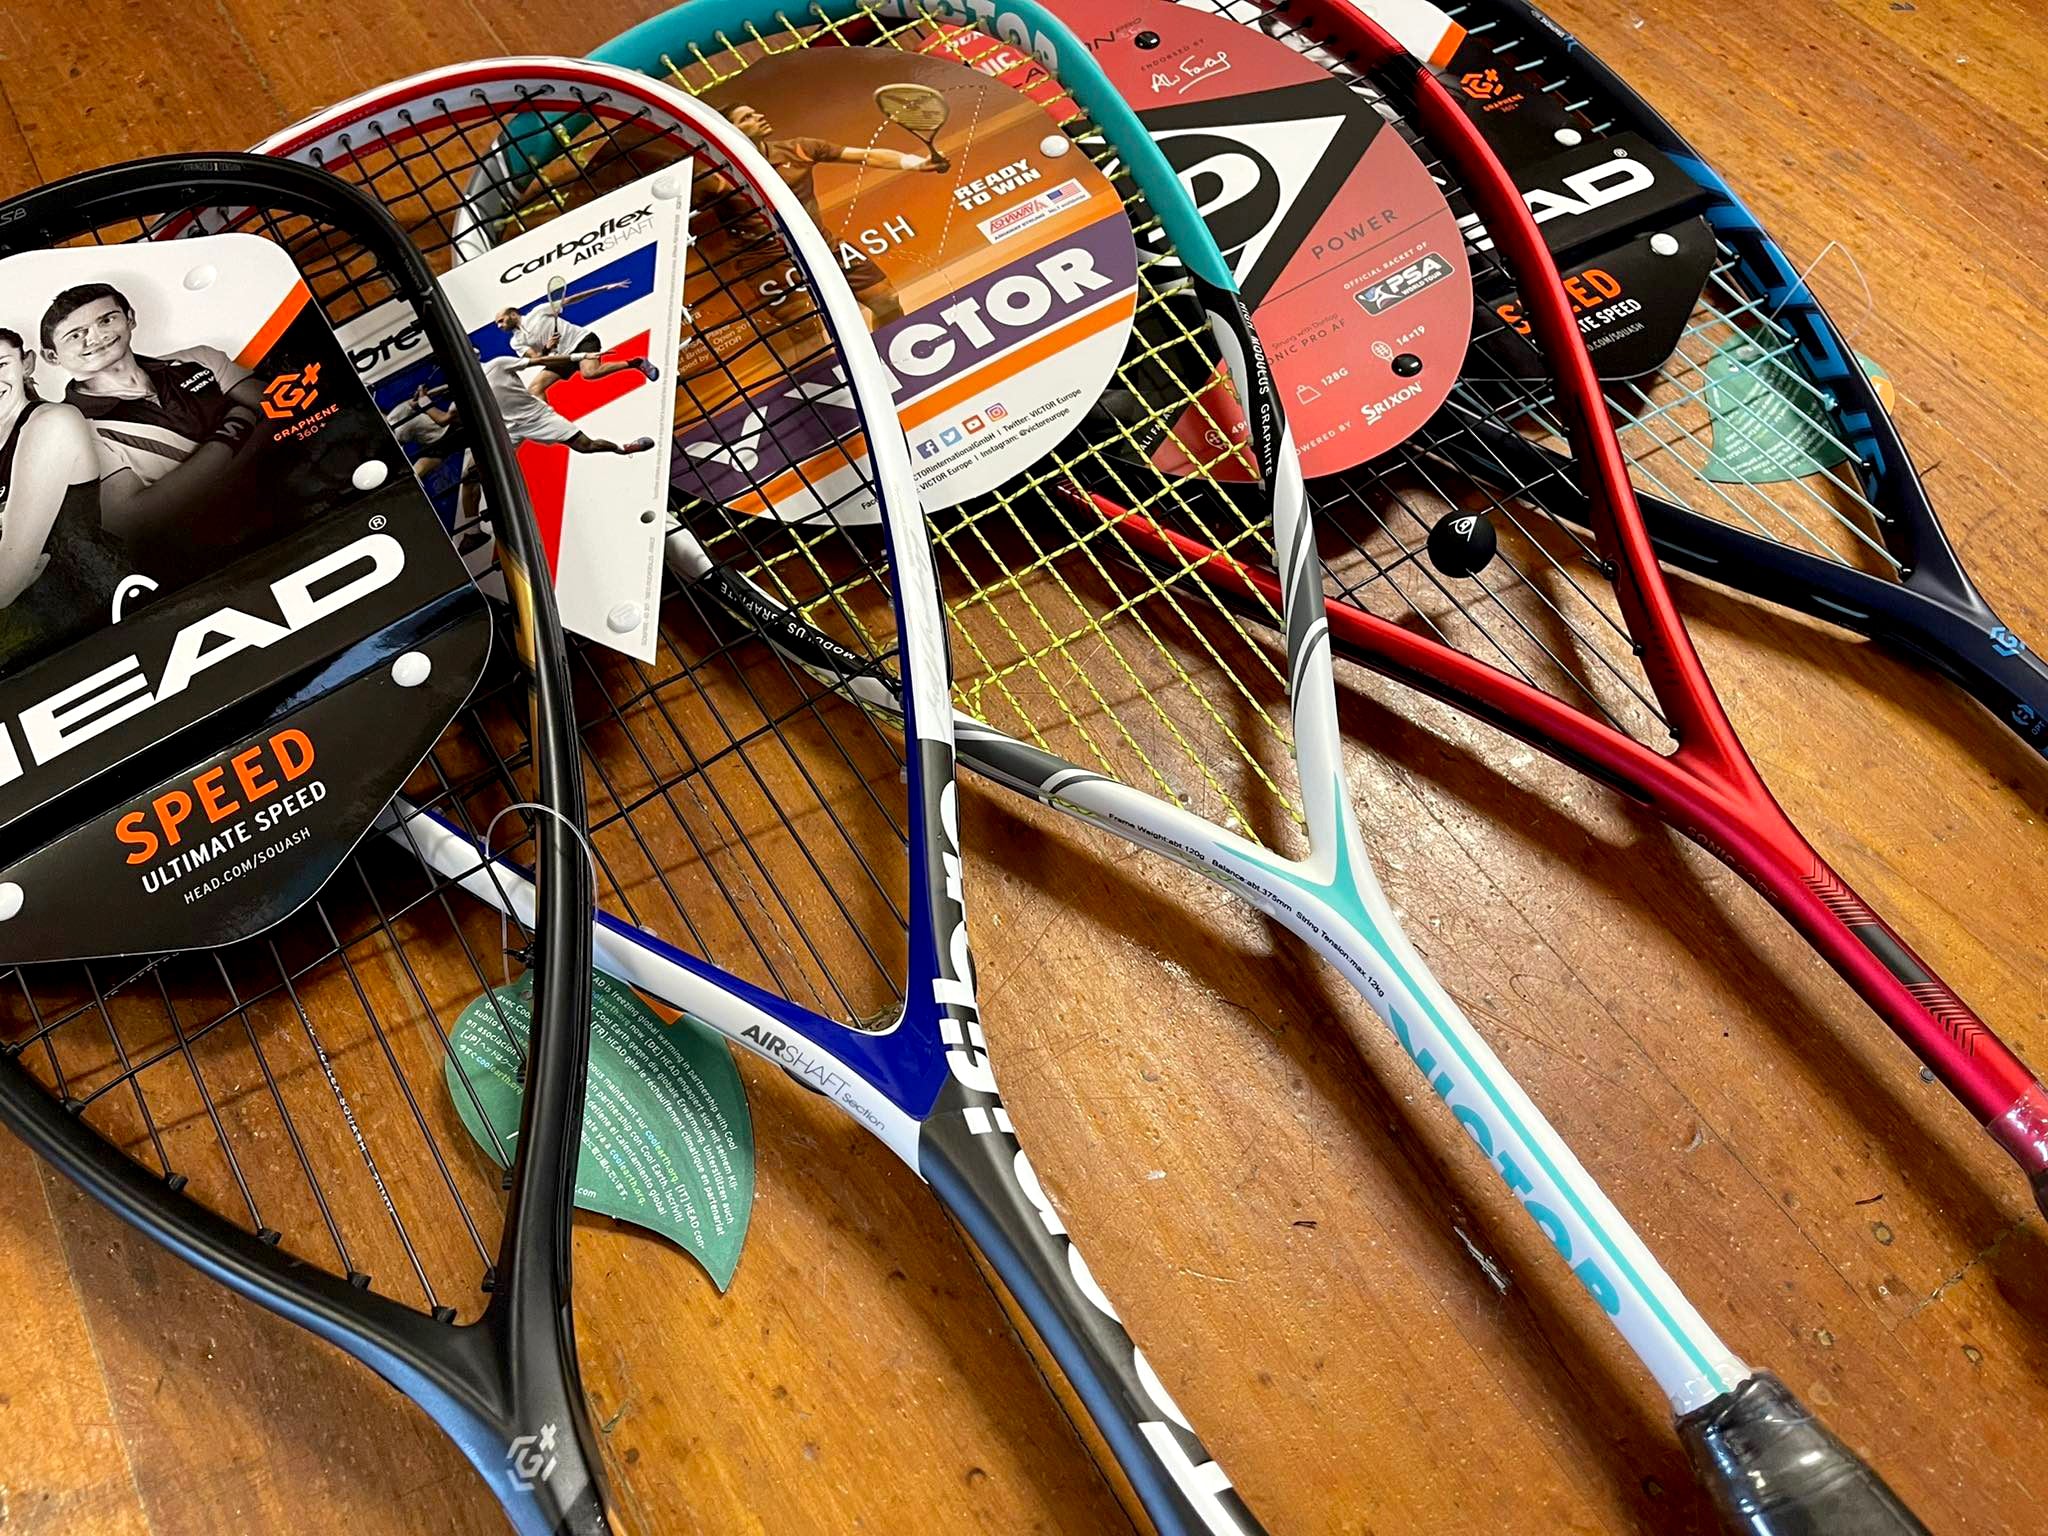 Top 5 Squash Racquets for 2021: Find the Perfect Racquet for Your Game